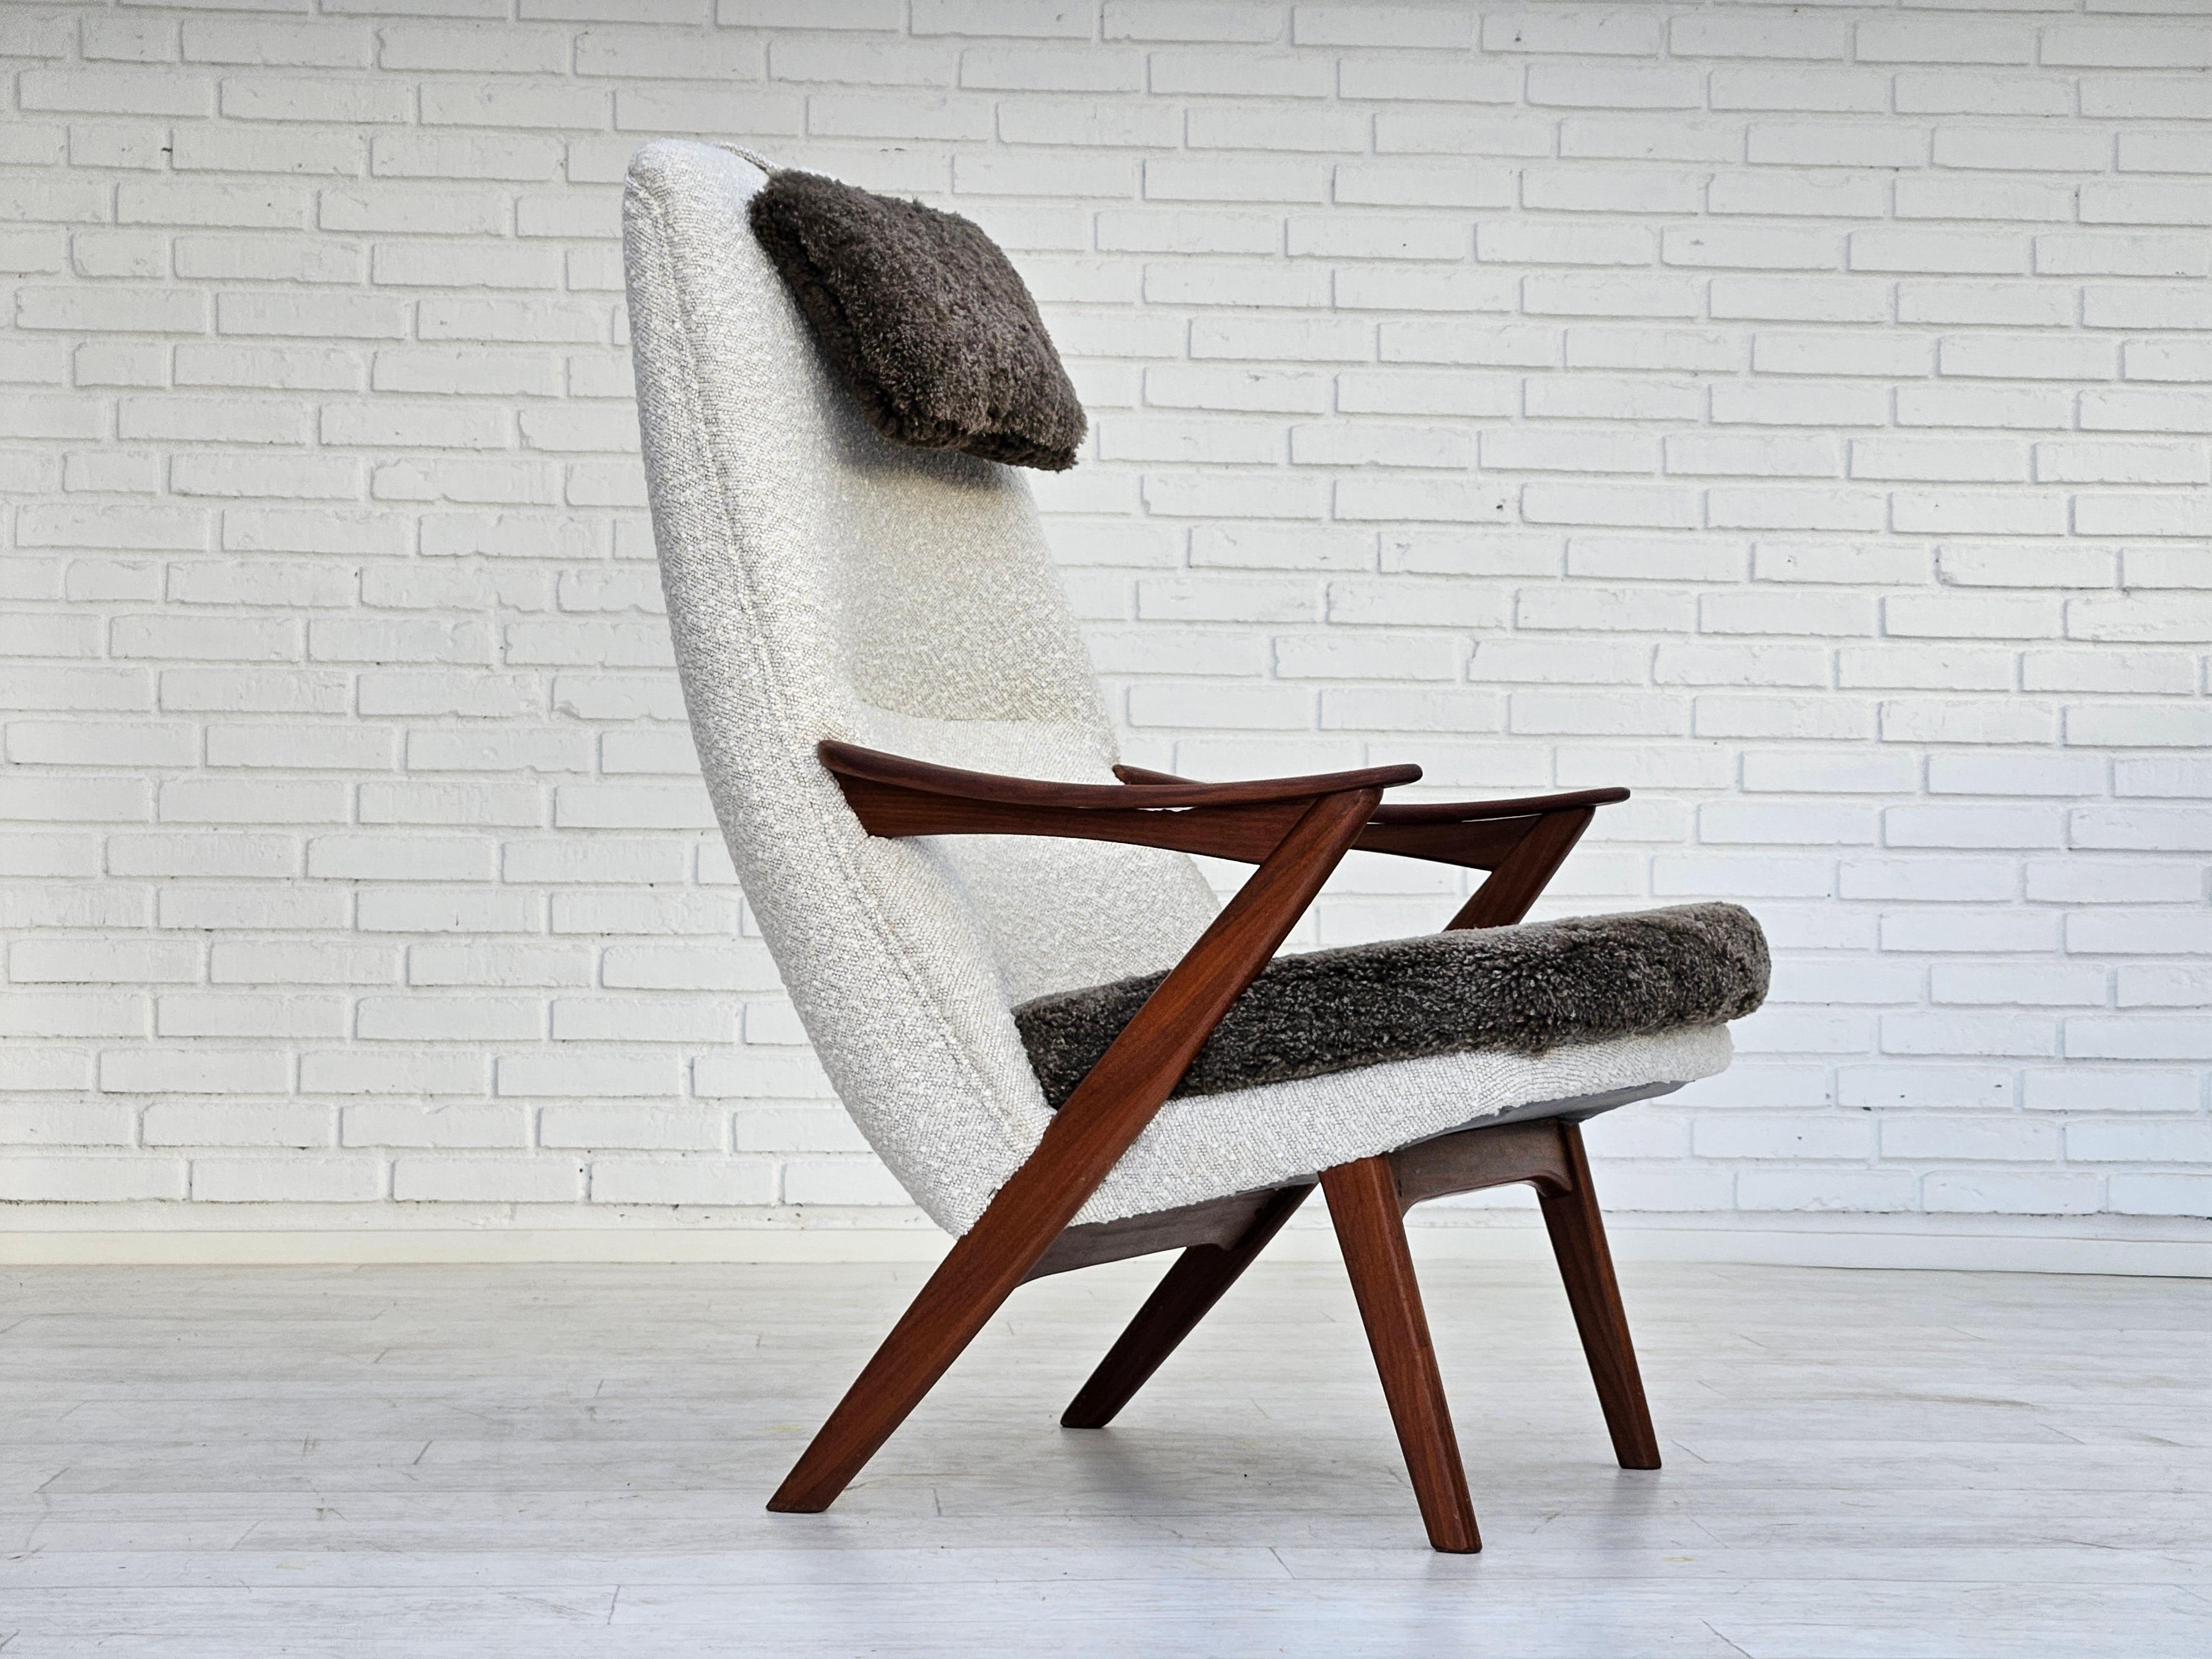 1960s, Scandinavian design. Completely renovated-reupholstered high-back armchair. Brand new upholstery with natural coconut mat. Beige/white fabric, genuine New Zealand sheepskin Wellington, teak wood. Loose seat cushion and removable neck pillow